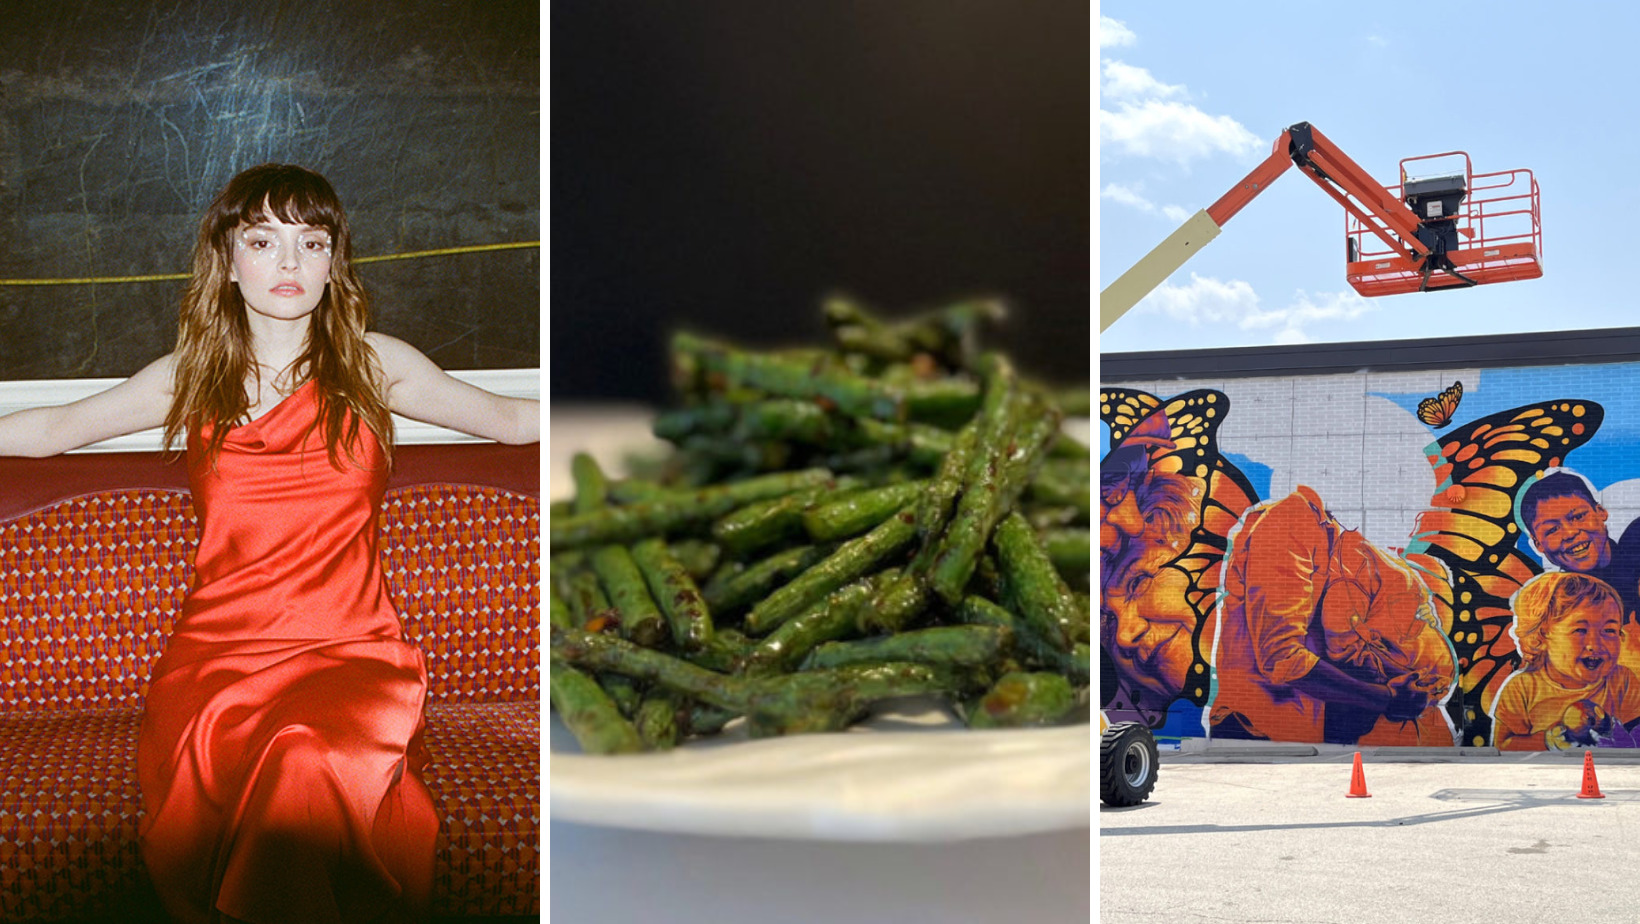 Three side by side images. The first is a white woman with long brown hair and a reddish orange dress, sitting on a sofa with arms outstretched. In the center is a white plate piled with cooked green beans. The third is a brightly colored mural on the side of a building, with a crane in the foreground.